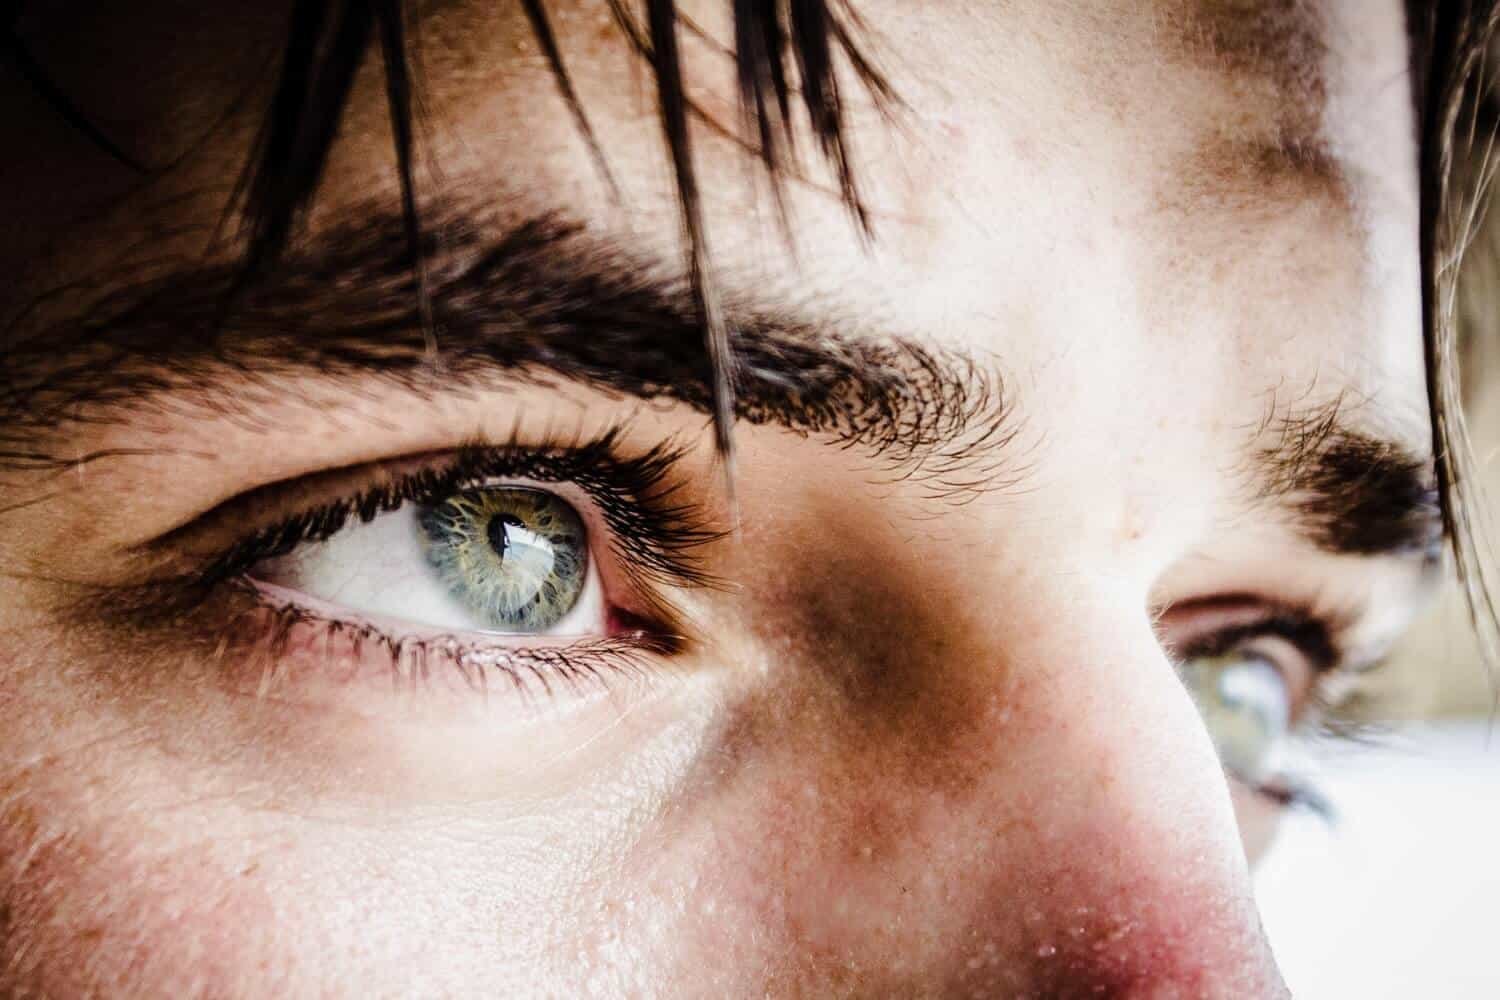 Cropped images can result in stunning male model images, like this closeup of the model's eyes.